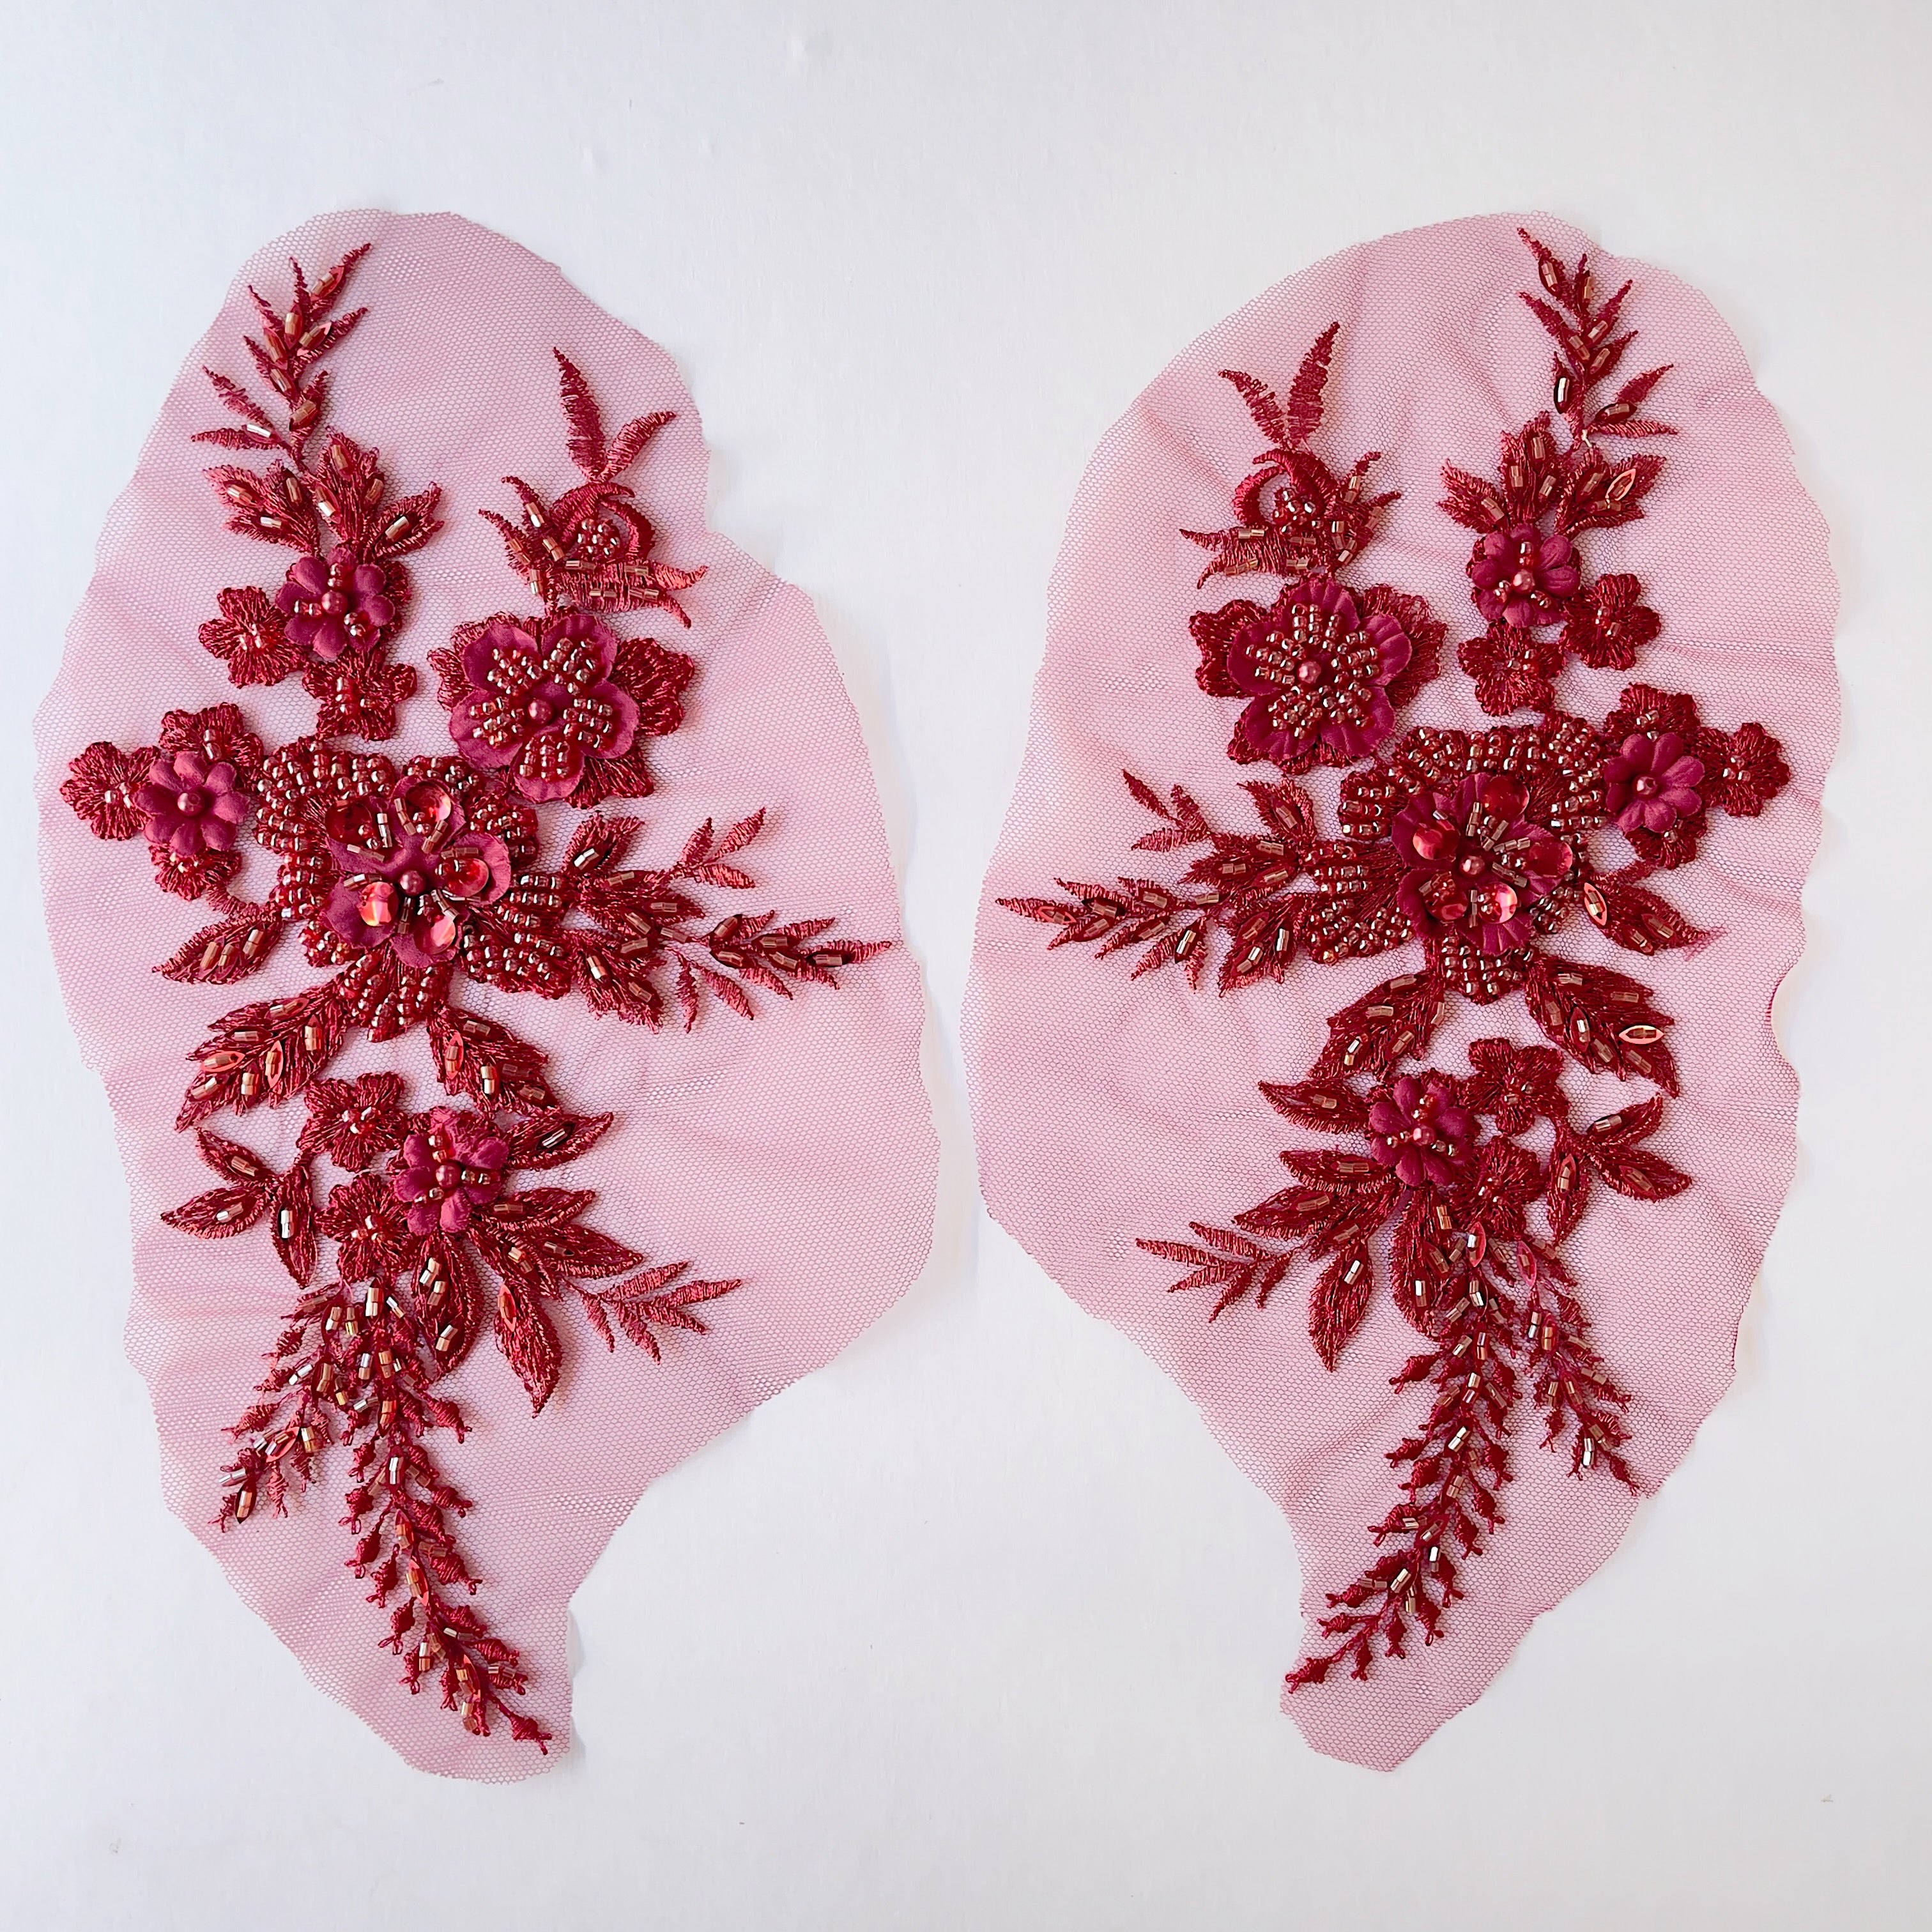 A mirrored pair of beaded burgundy floral appliques embroidered onto a matching net backing. Embellished with burgundy beads, sequins and satin 3D flowers.  The appliques are laying flat on a white background.